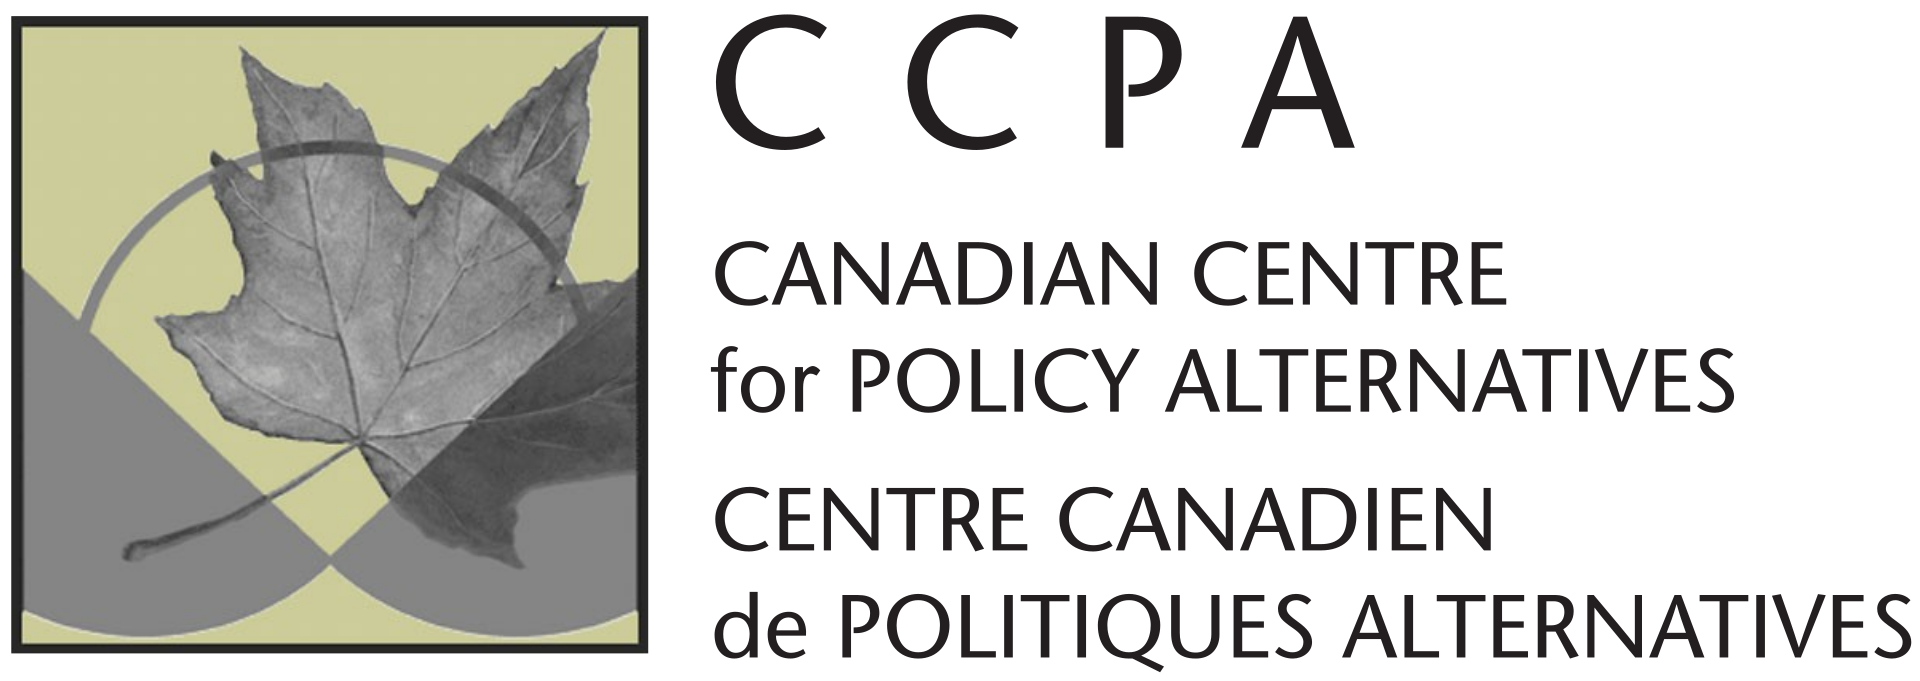 From the Canadian Centre for Policy Alternatives